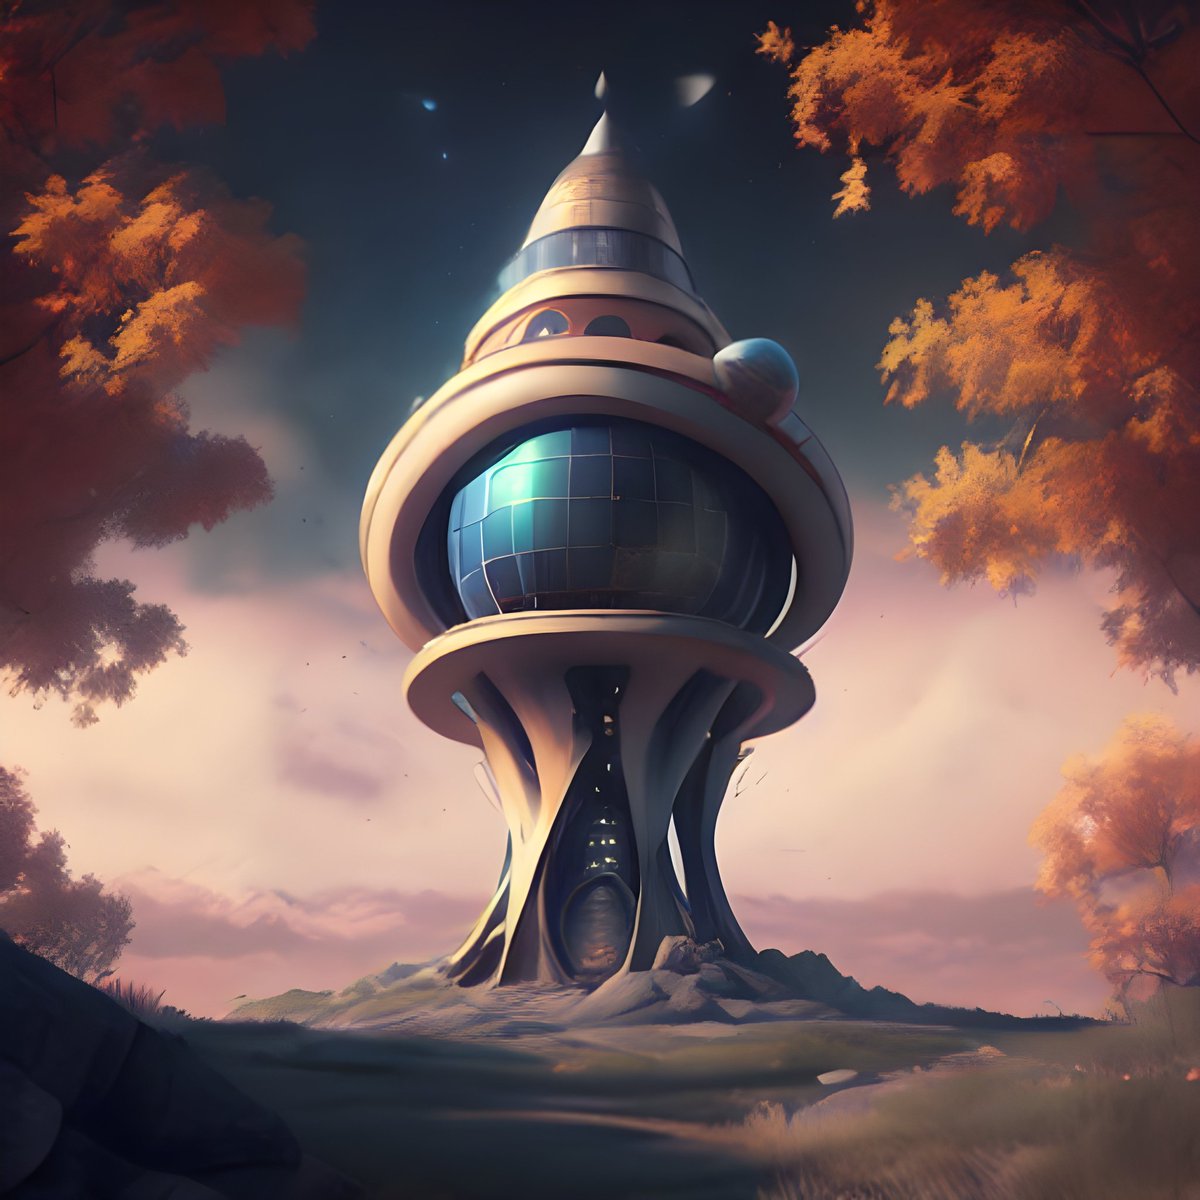 🎁 #Giveaway  🎁

It's the last month for our mint on @EbisusBay - Mint and stake them for 6 months!

Mint and stake your towers right away 👇

app.ebisusbay.com/drops/cronos-t…
 
Prize:
🏆1x Tower 

To Enter:
✅ Follow  @cro_towers
✅ Tag  5 #crofam 

72H ⌛️

#NFTs #CronosChain #CronosNFT…